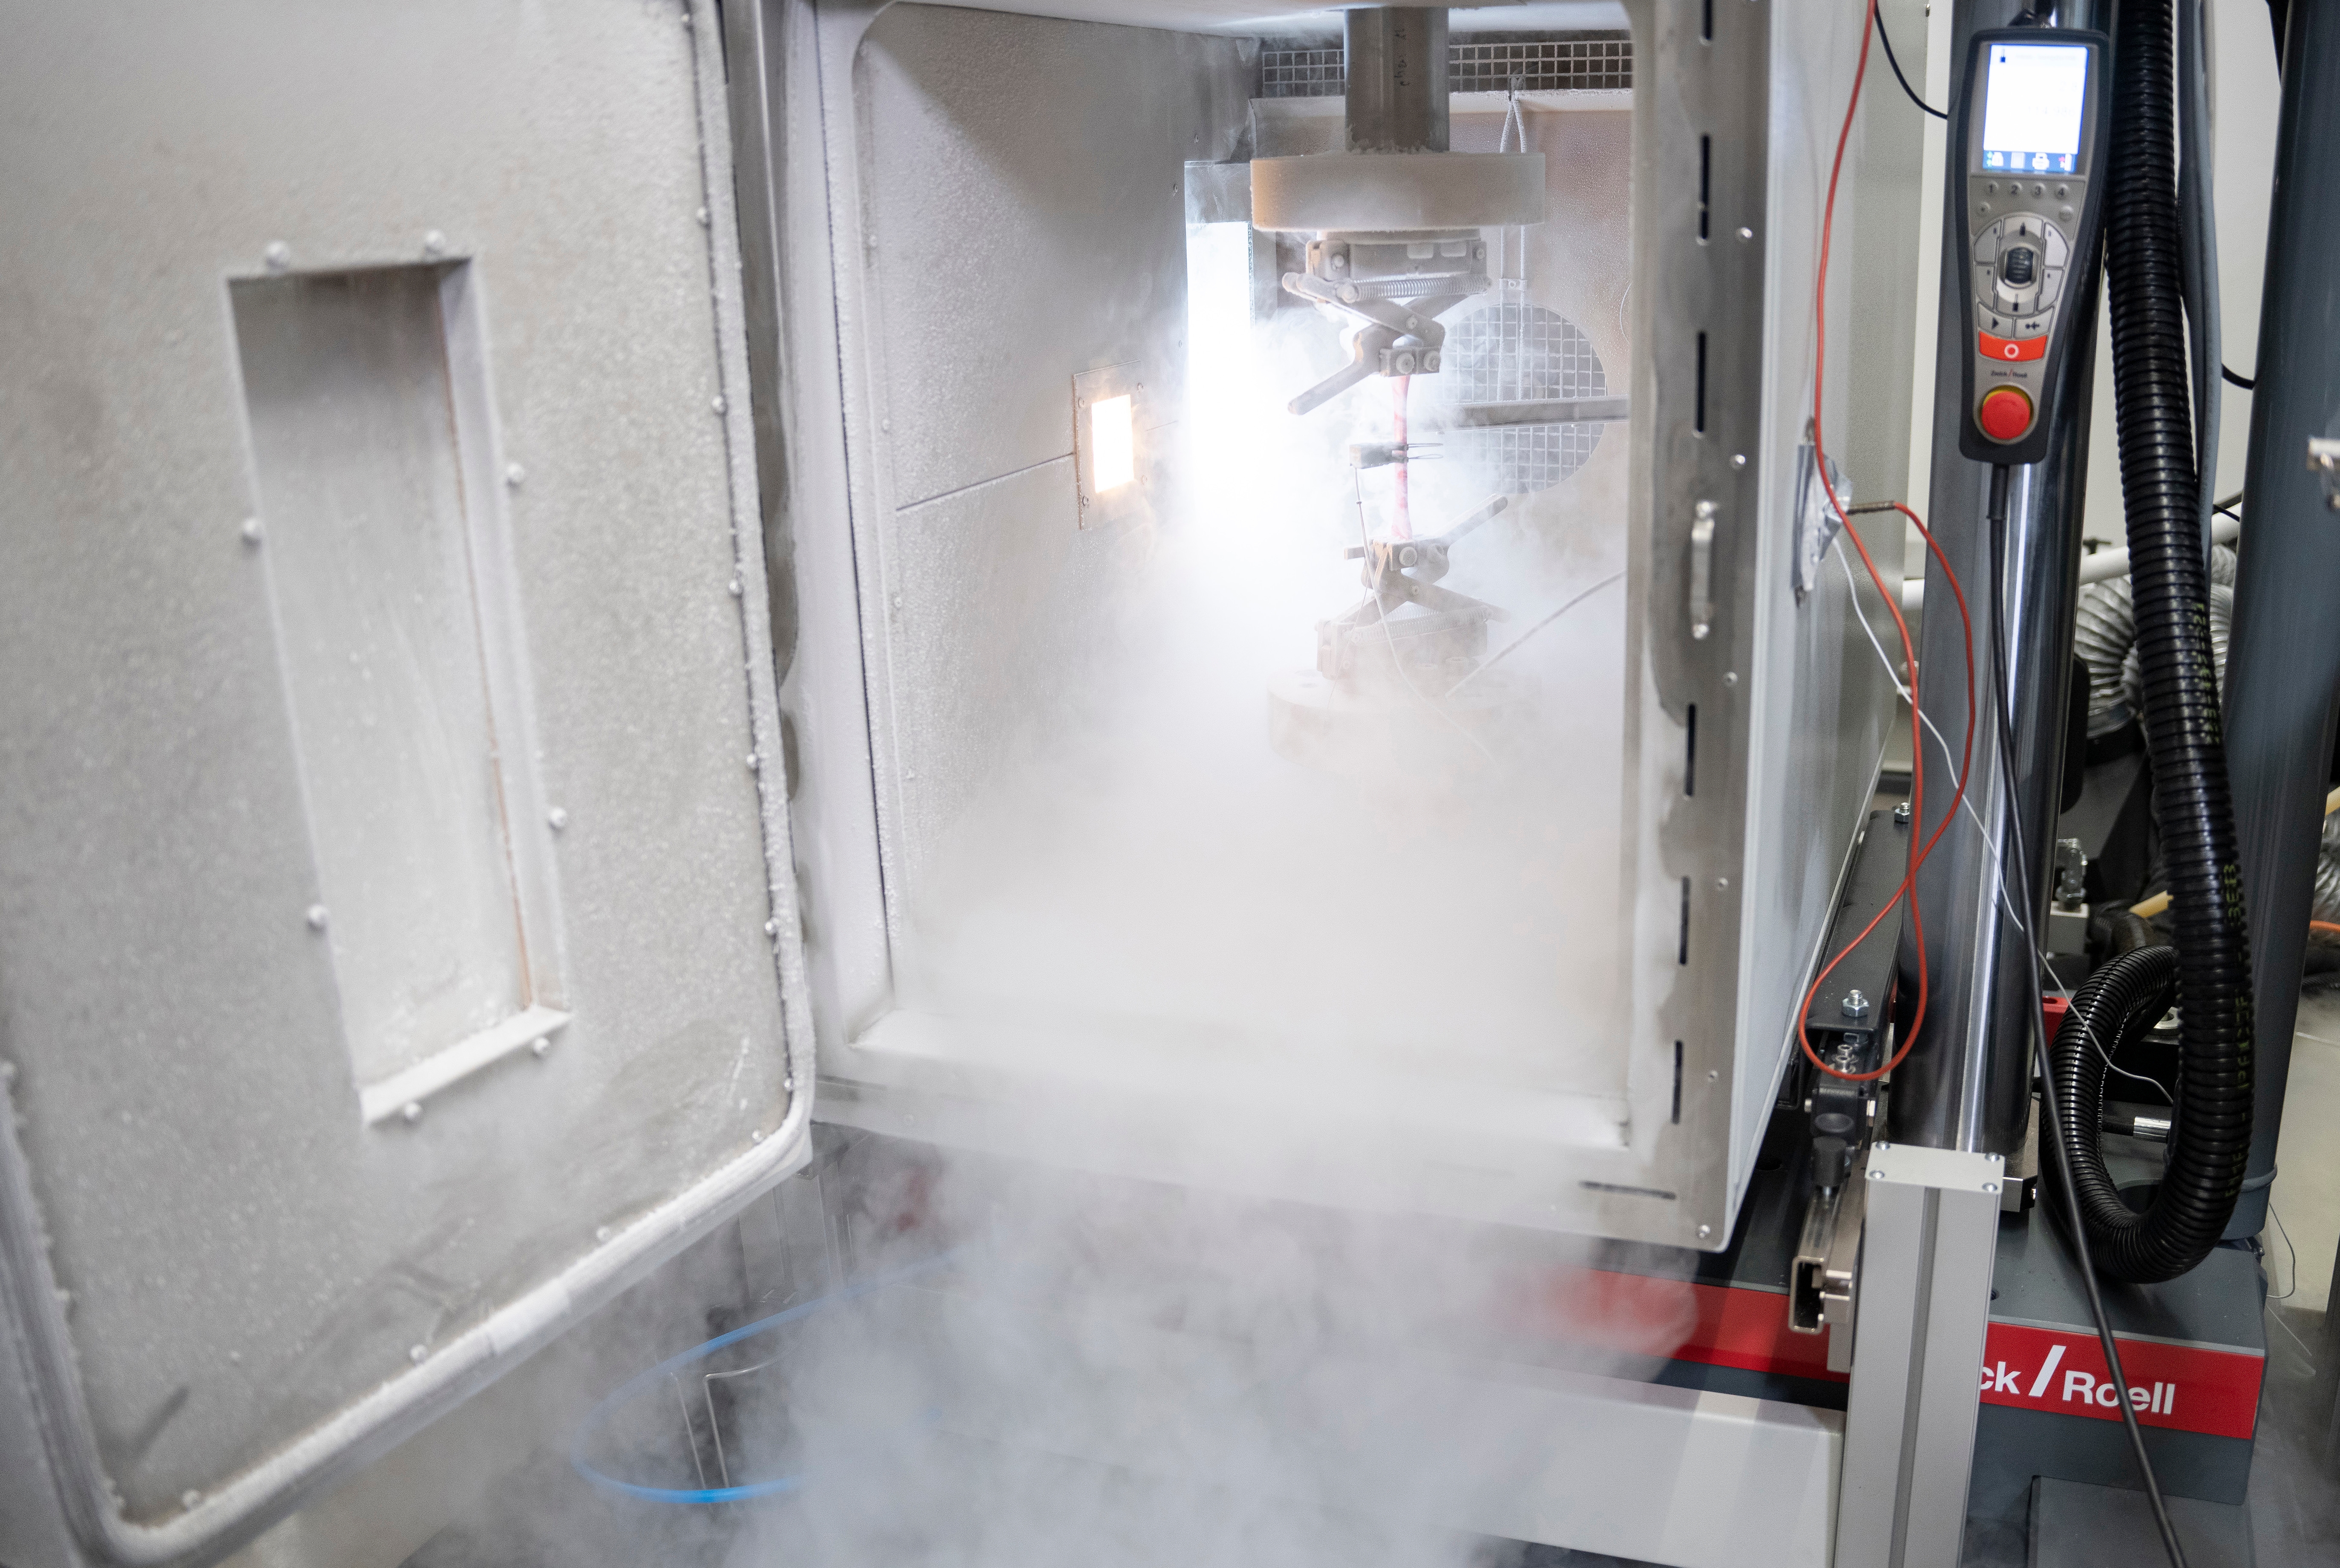 Sample preparation for static and dynamic material testing in the nitrogen-cooled climate chamber.